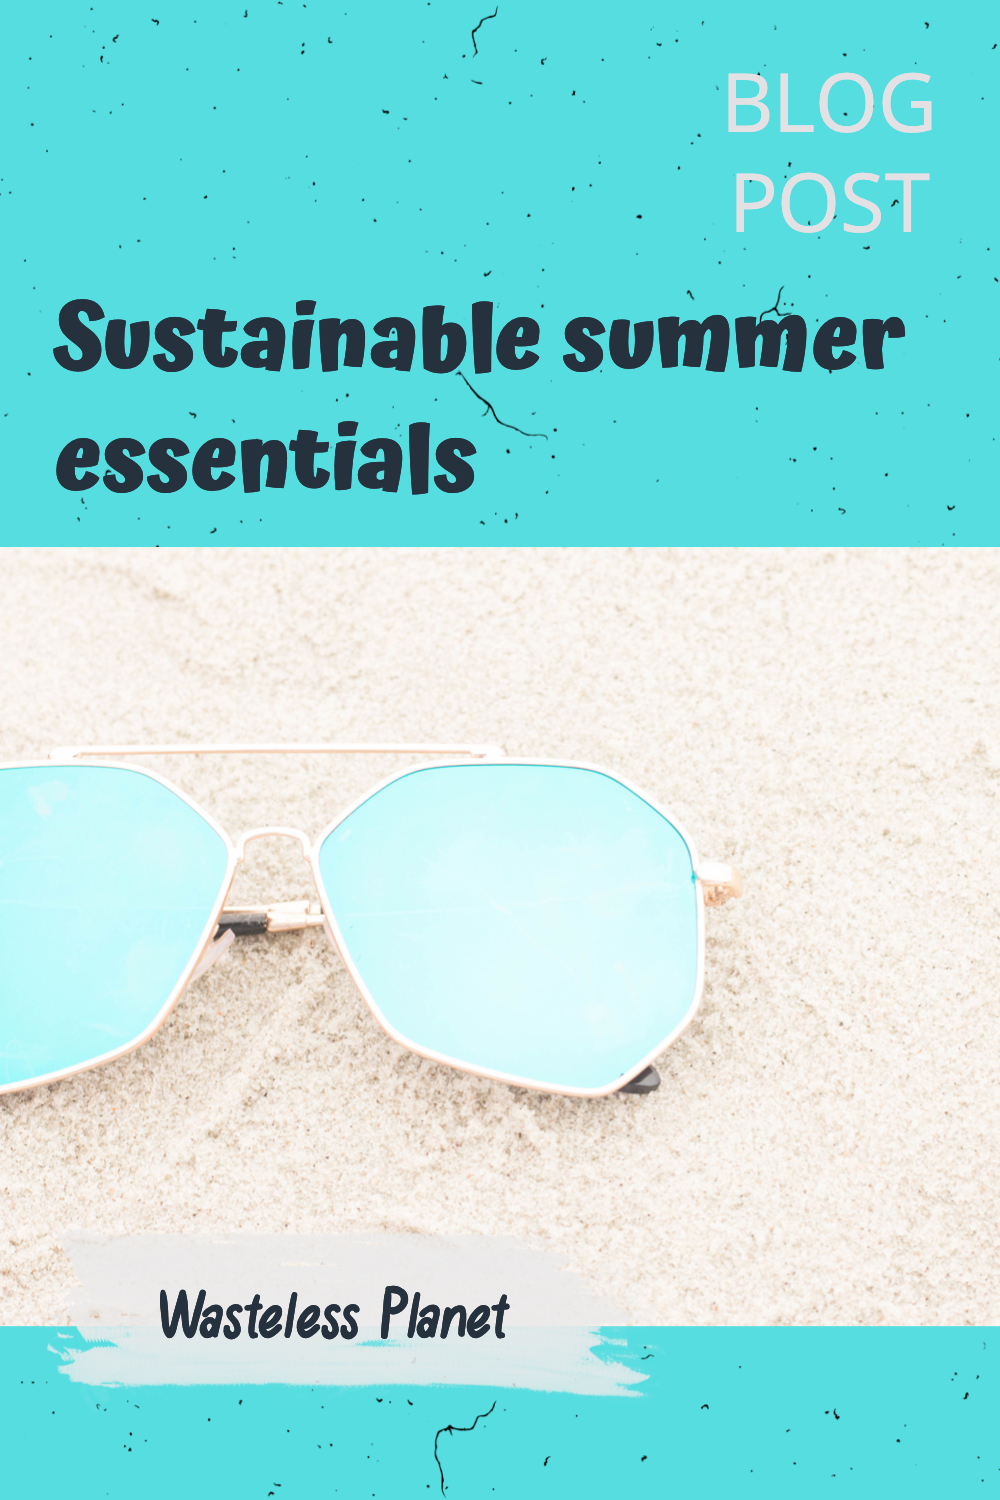 Sustainable summer essentials you need and love